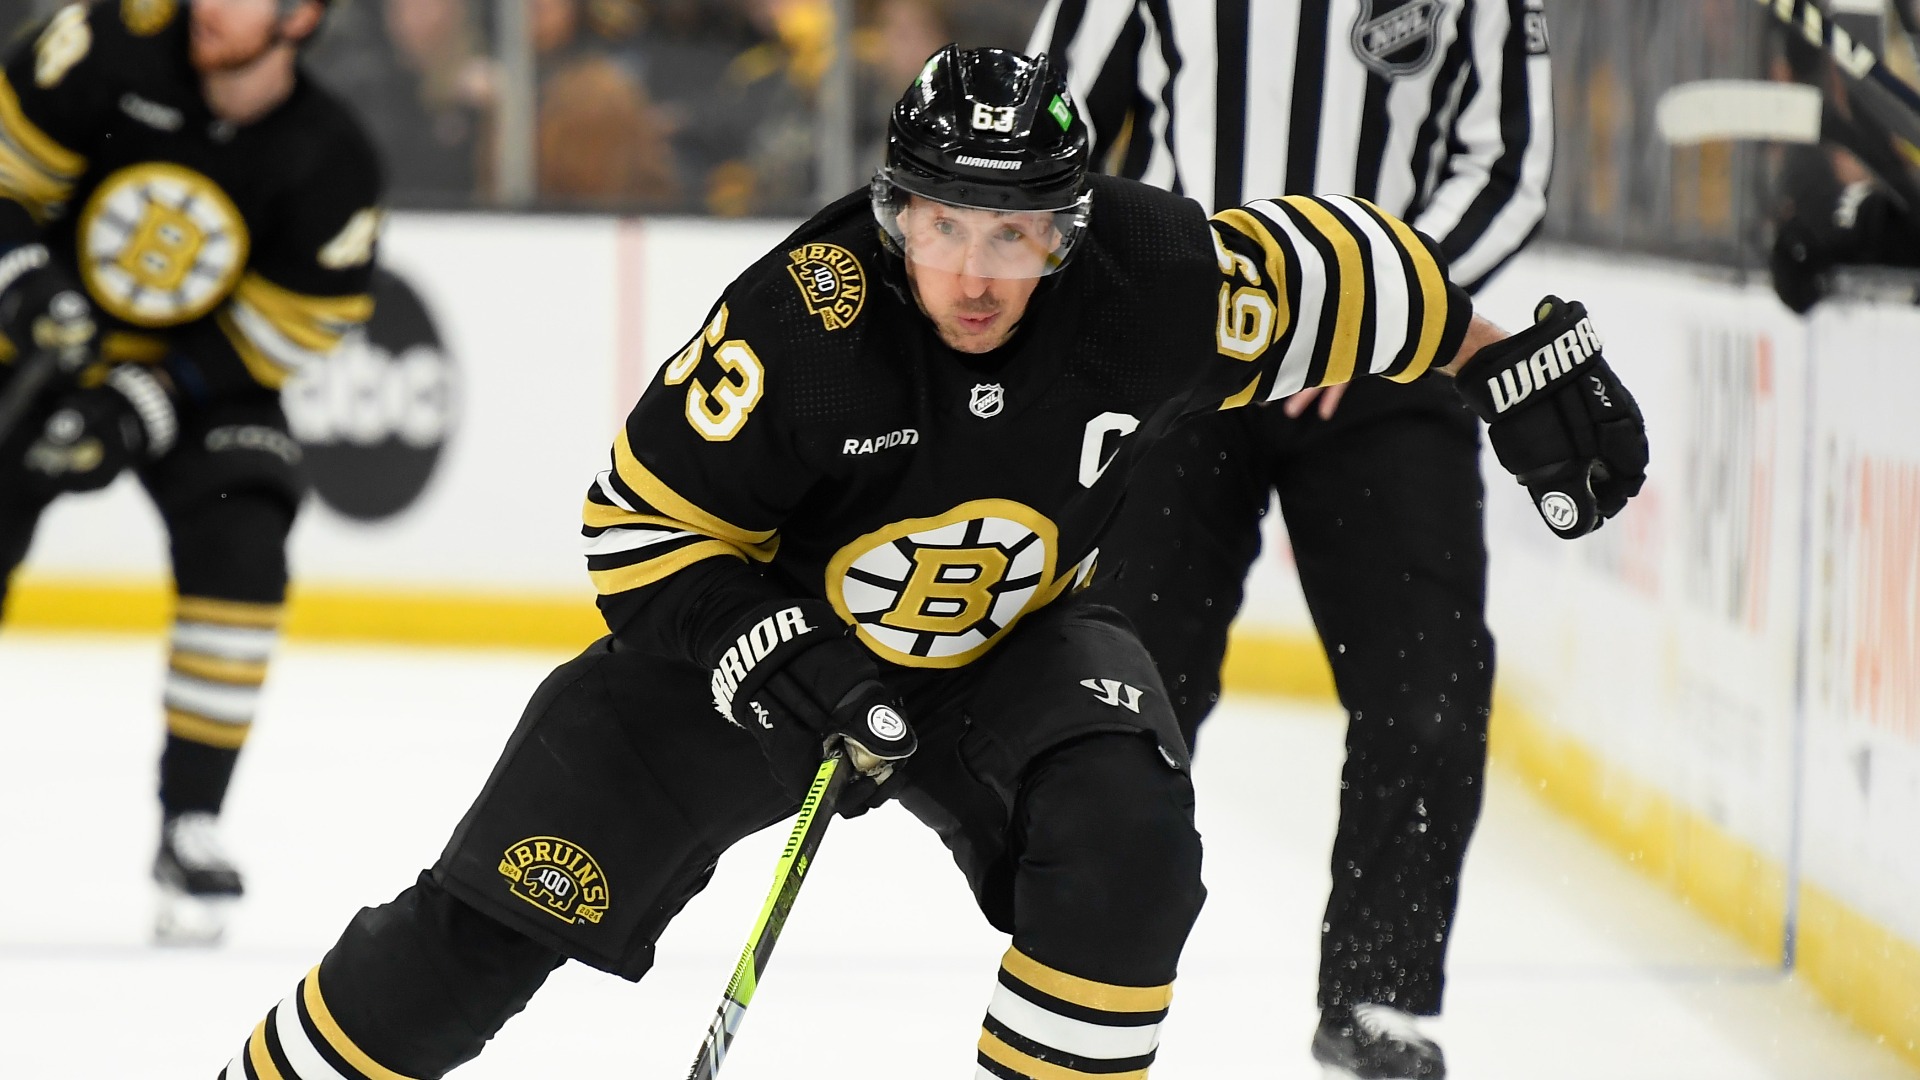 Bruins’ Brad Marchand Leaves Game 3 Vs. Panthers With Upper-Body
Injury